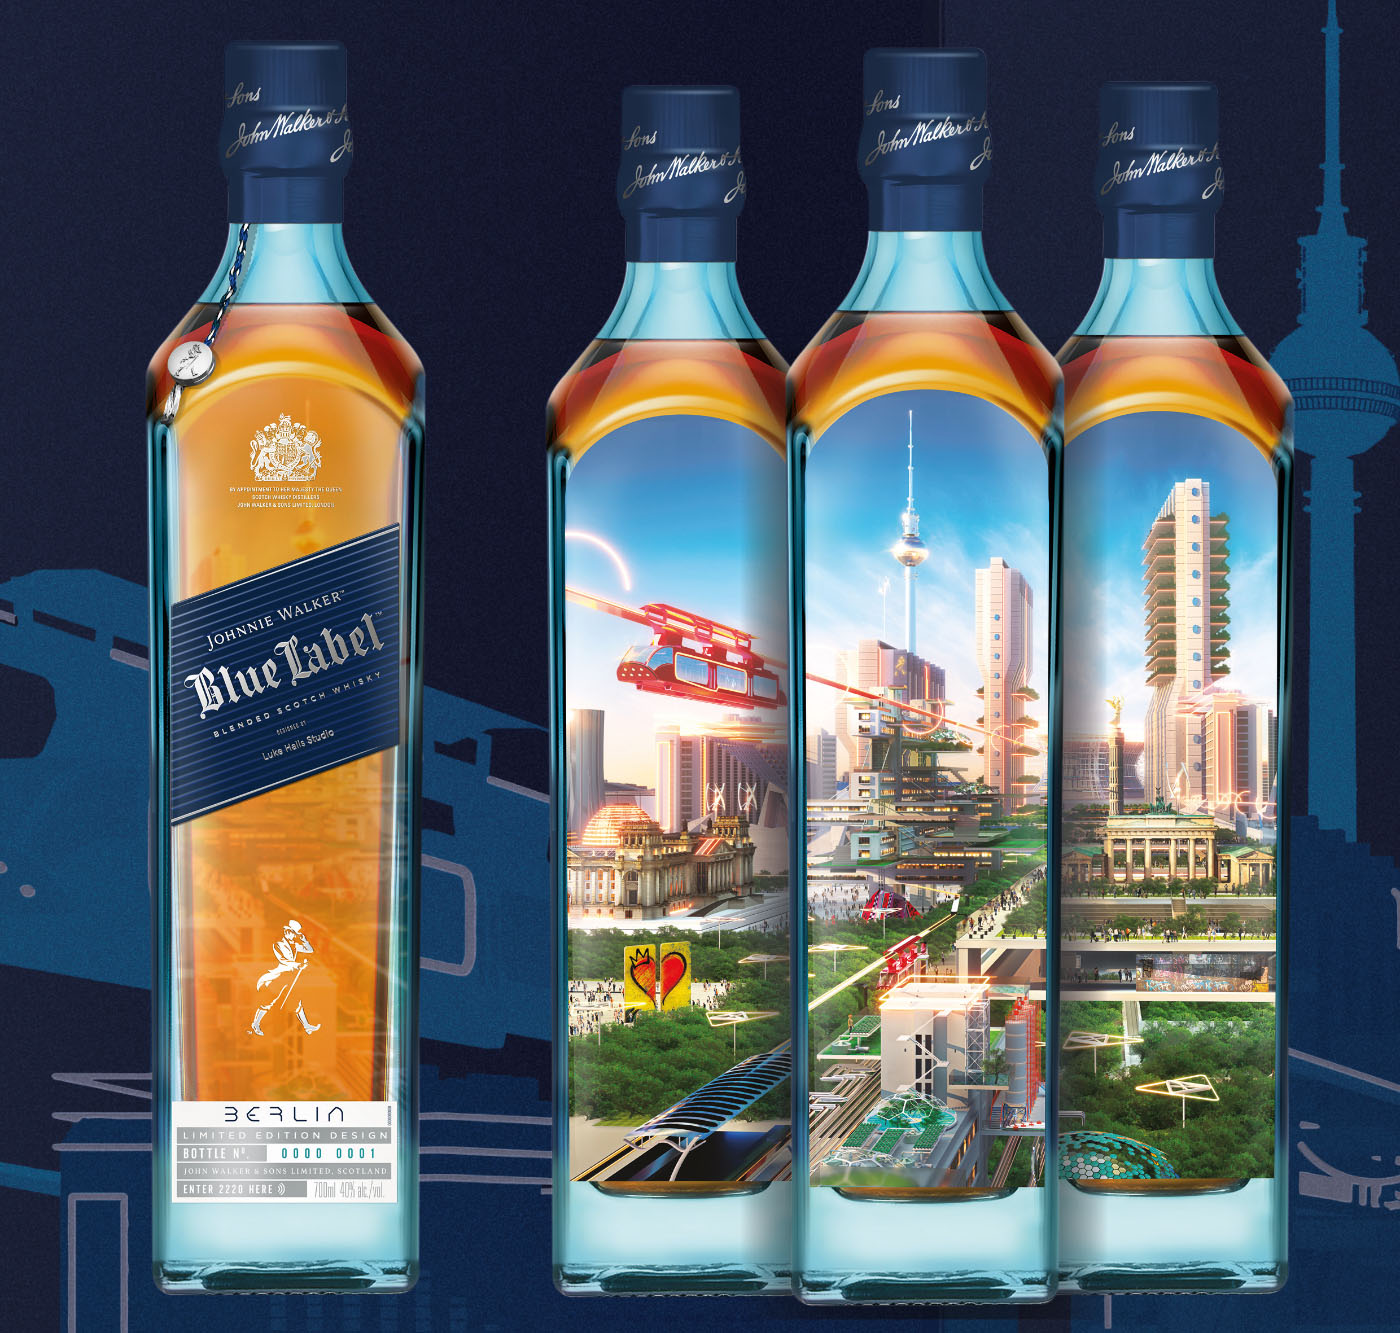 Johnnie Walker Blue Label looks to the future with an innovative collaboration with renowned digital artist Luke Halls.